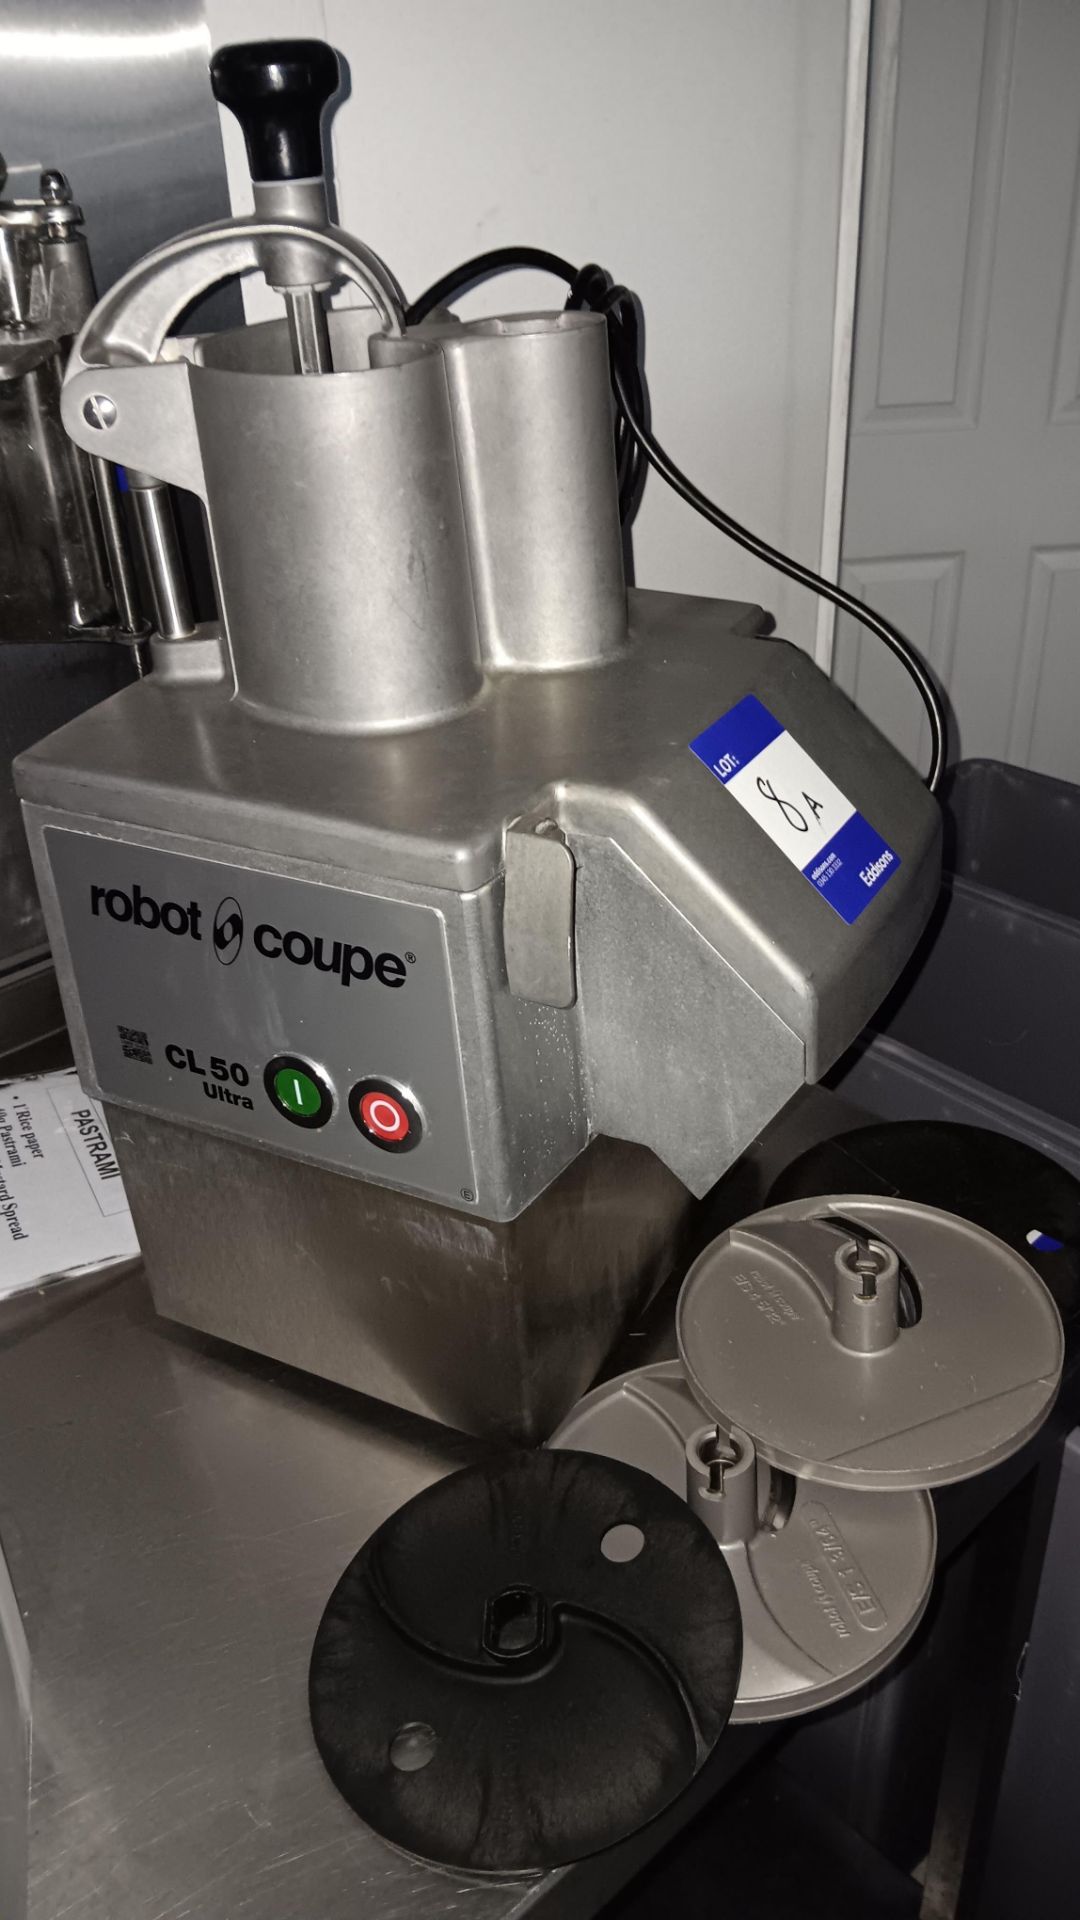 Robot Coupe CL50 E Ultra Vegetable Preparation Machine, Serial number P4520309701 - Image 2 of 6